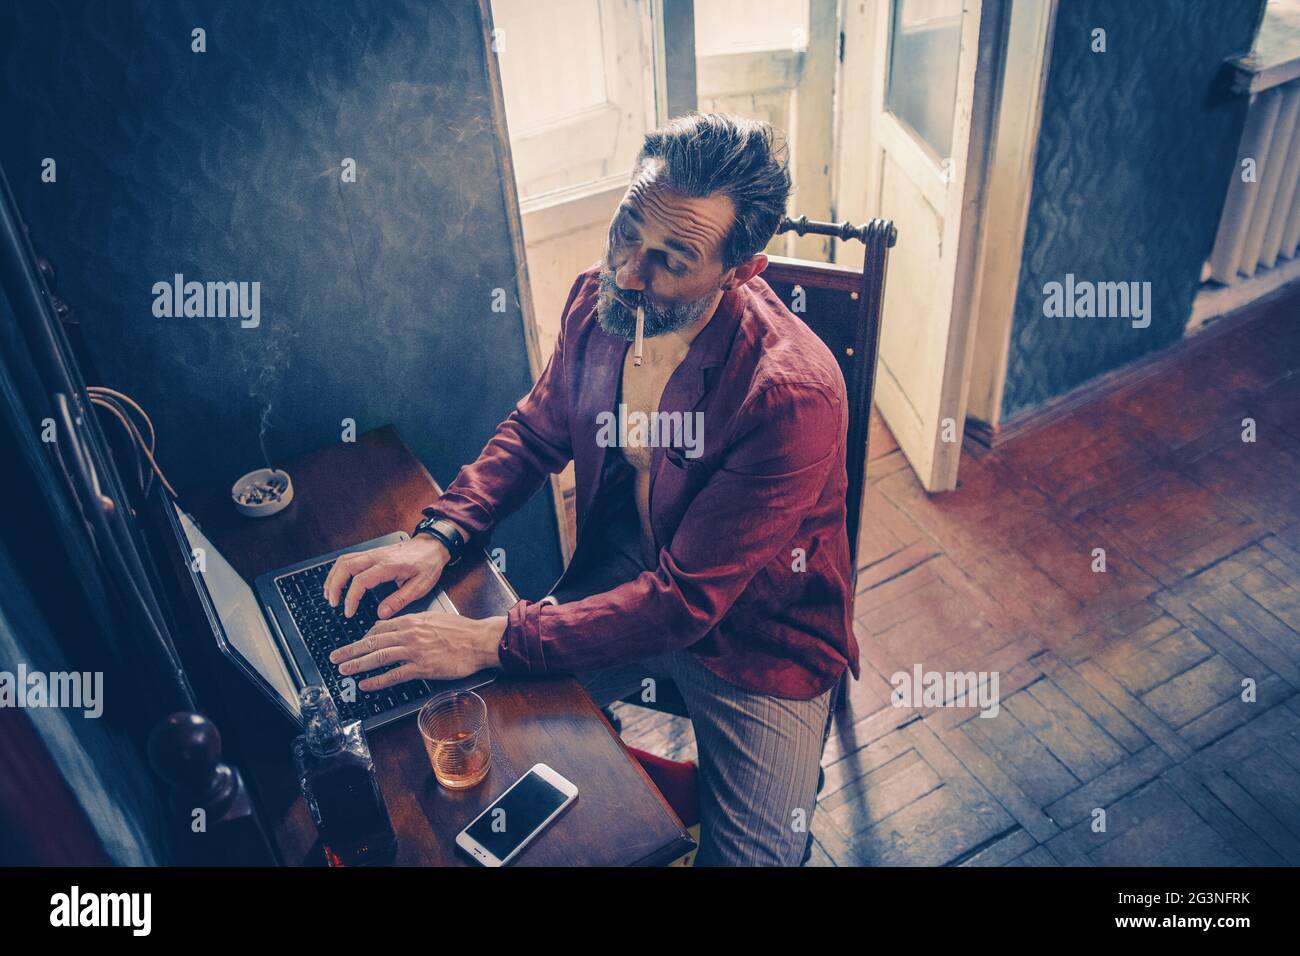 Handsome man works on his laptop smoking and drinking Stock Photo